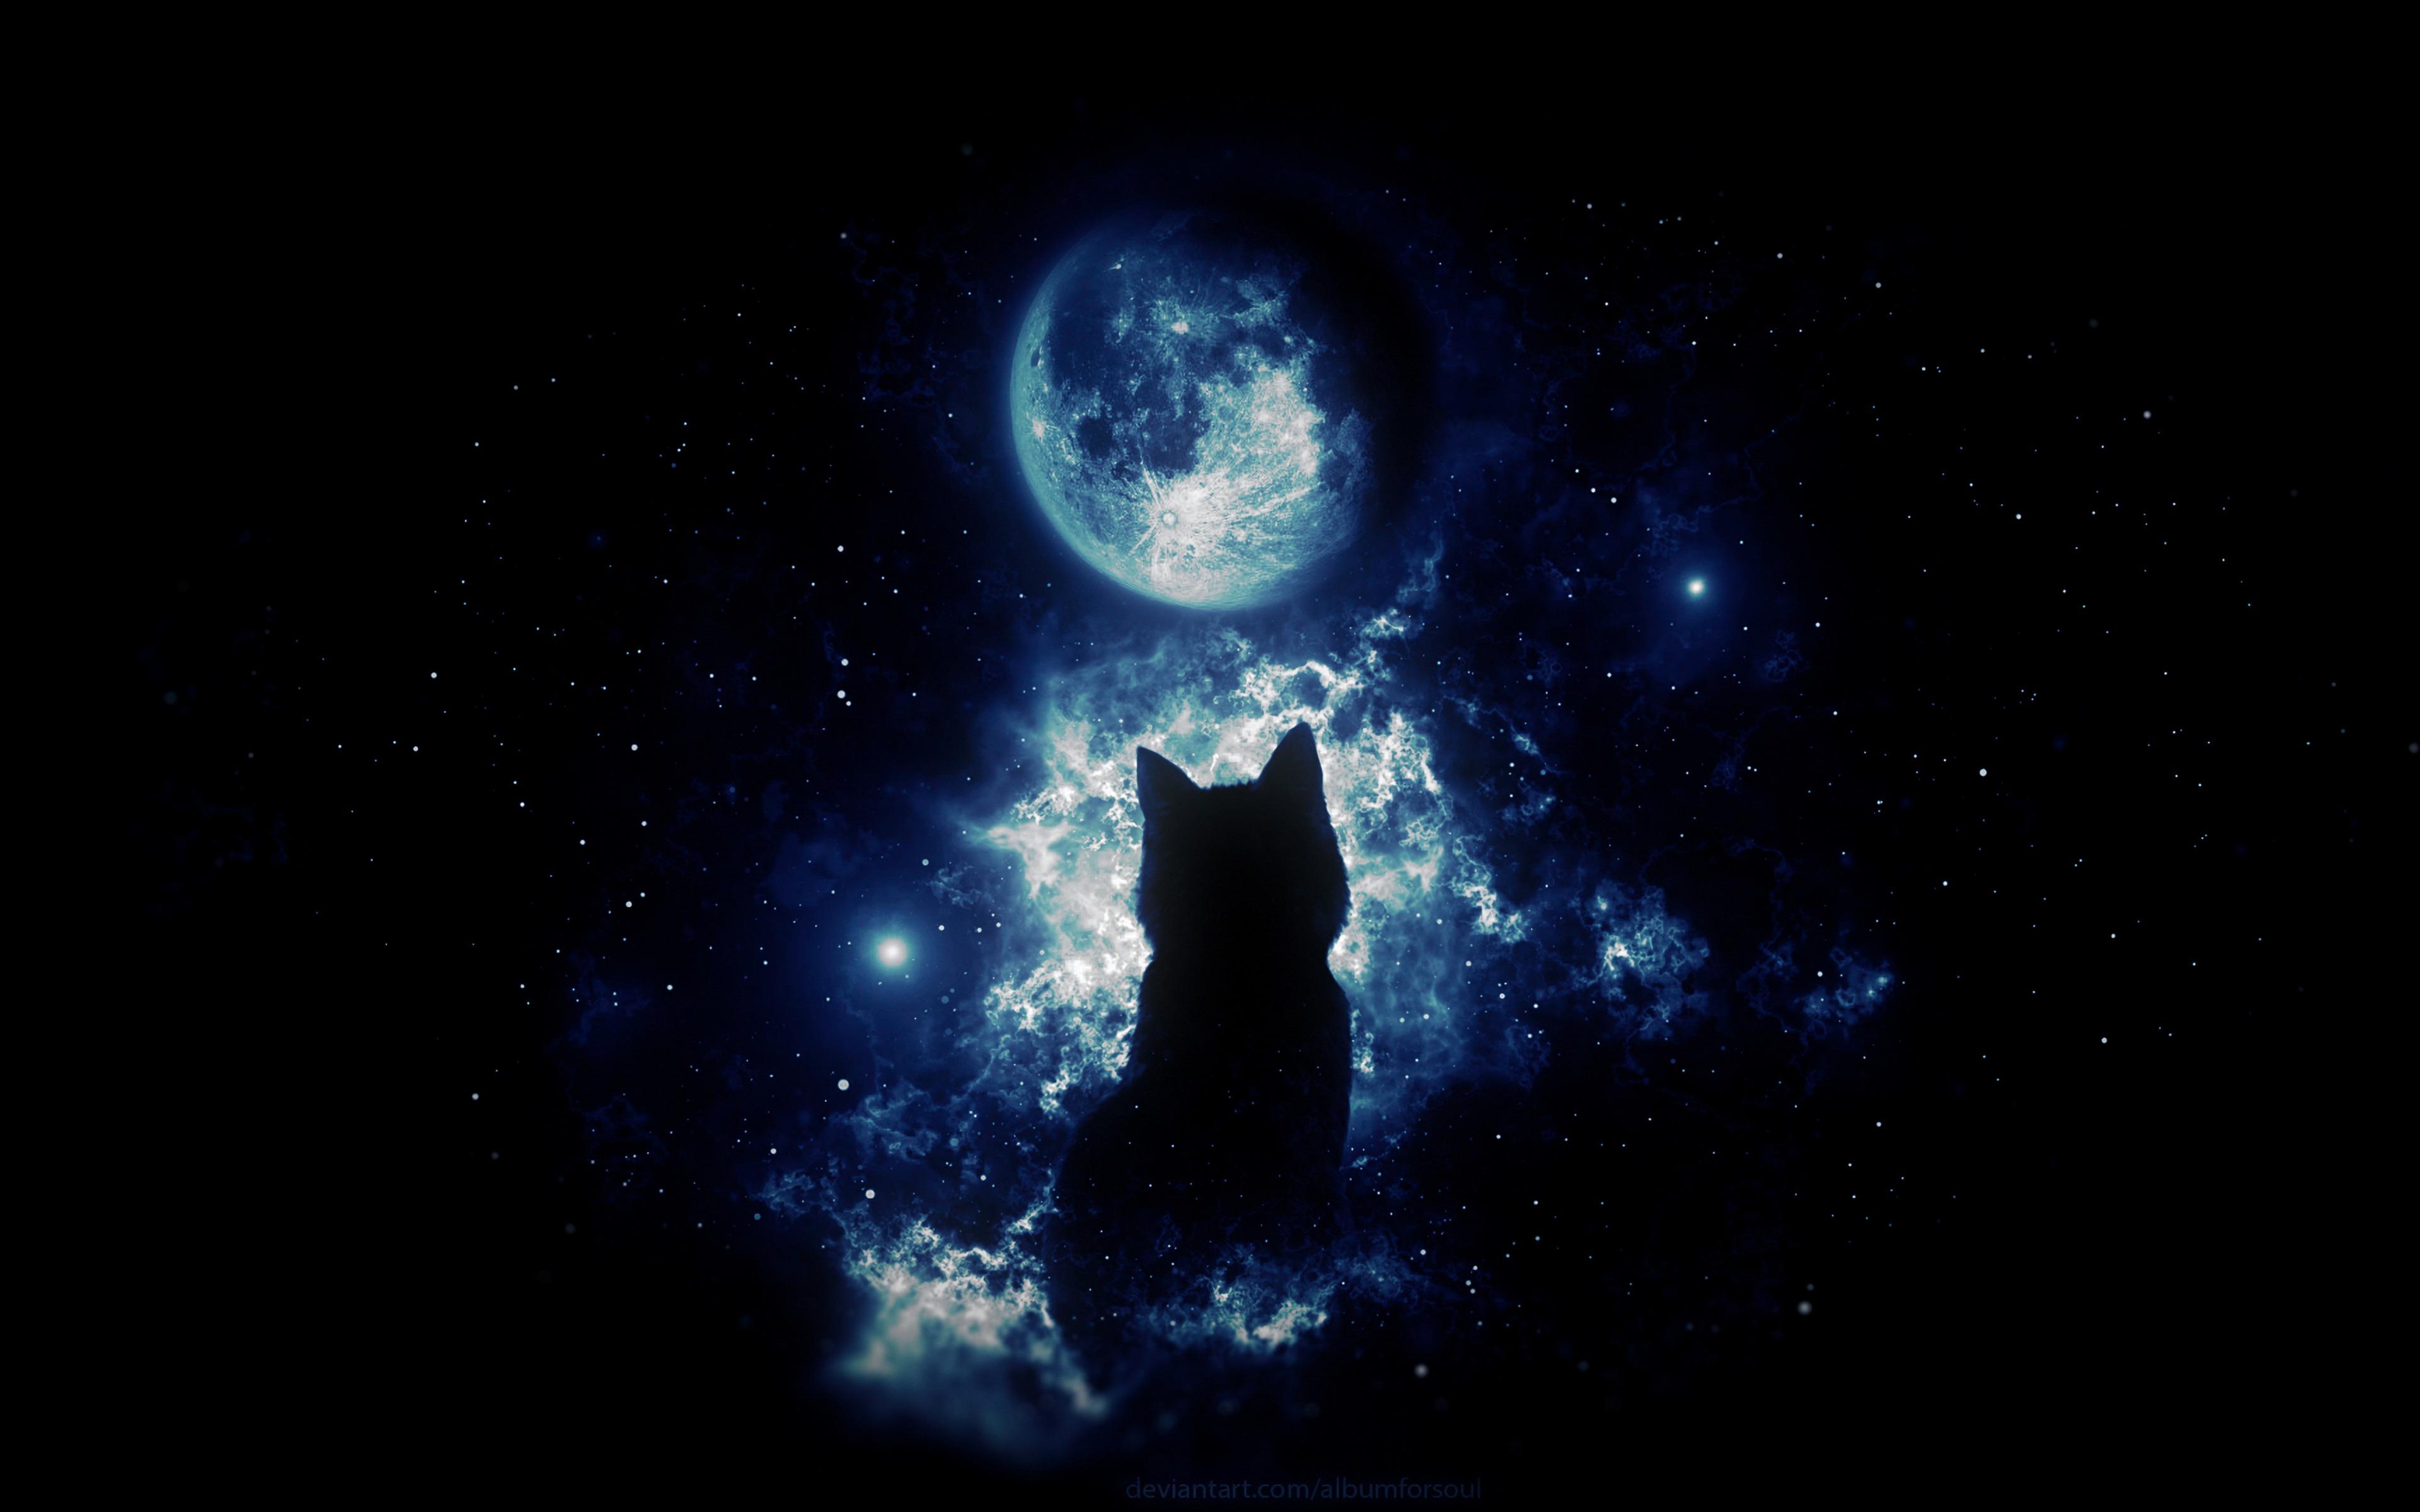 Cats On The Moon Wallpaper